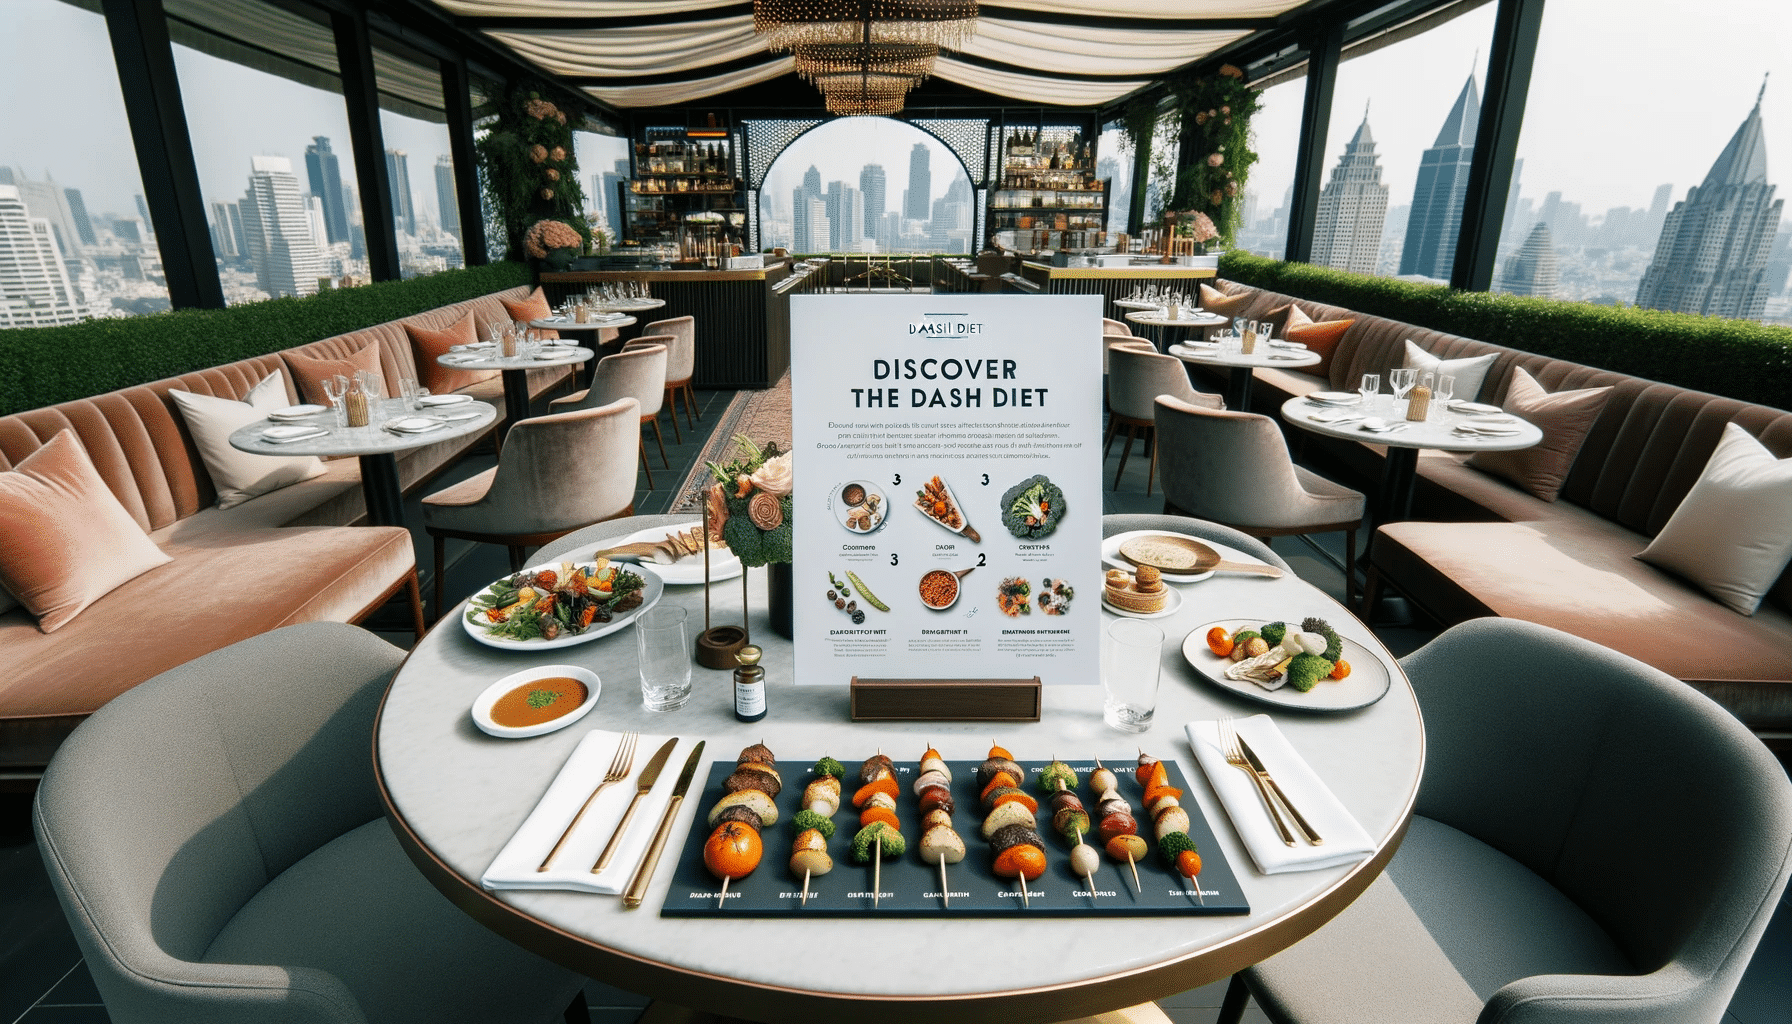 Professional photo of a sophisticated restaurant terrace with a city view. The menu showcases DASH diet delicacies, from roasted vegetables to lean me